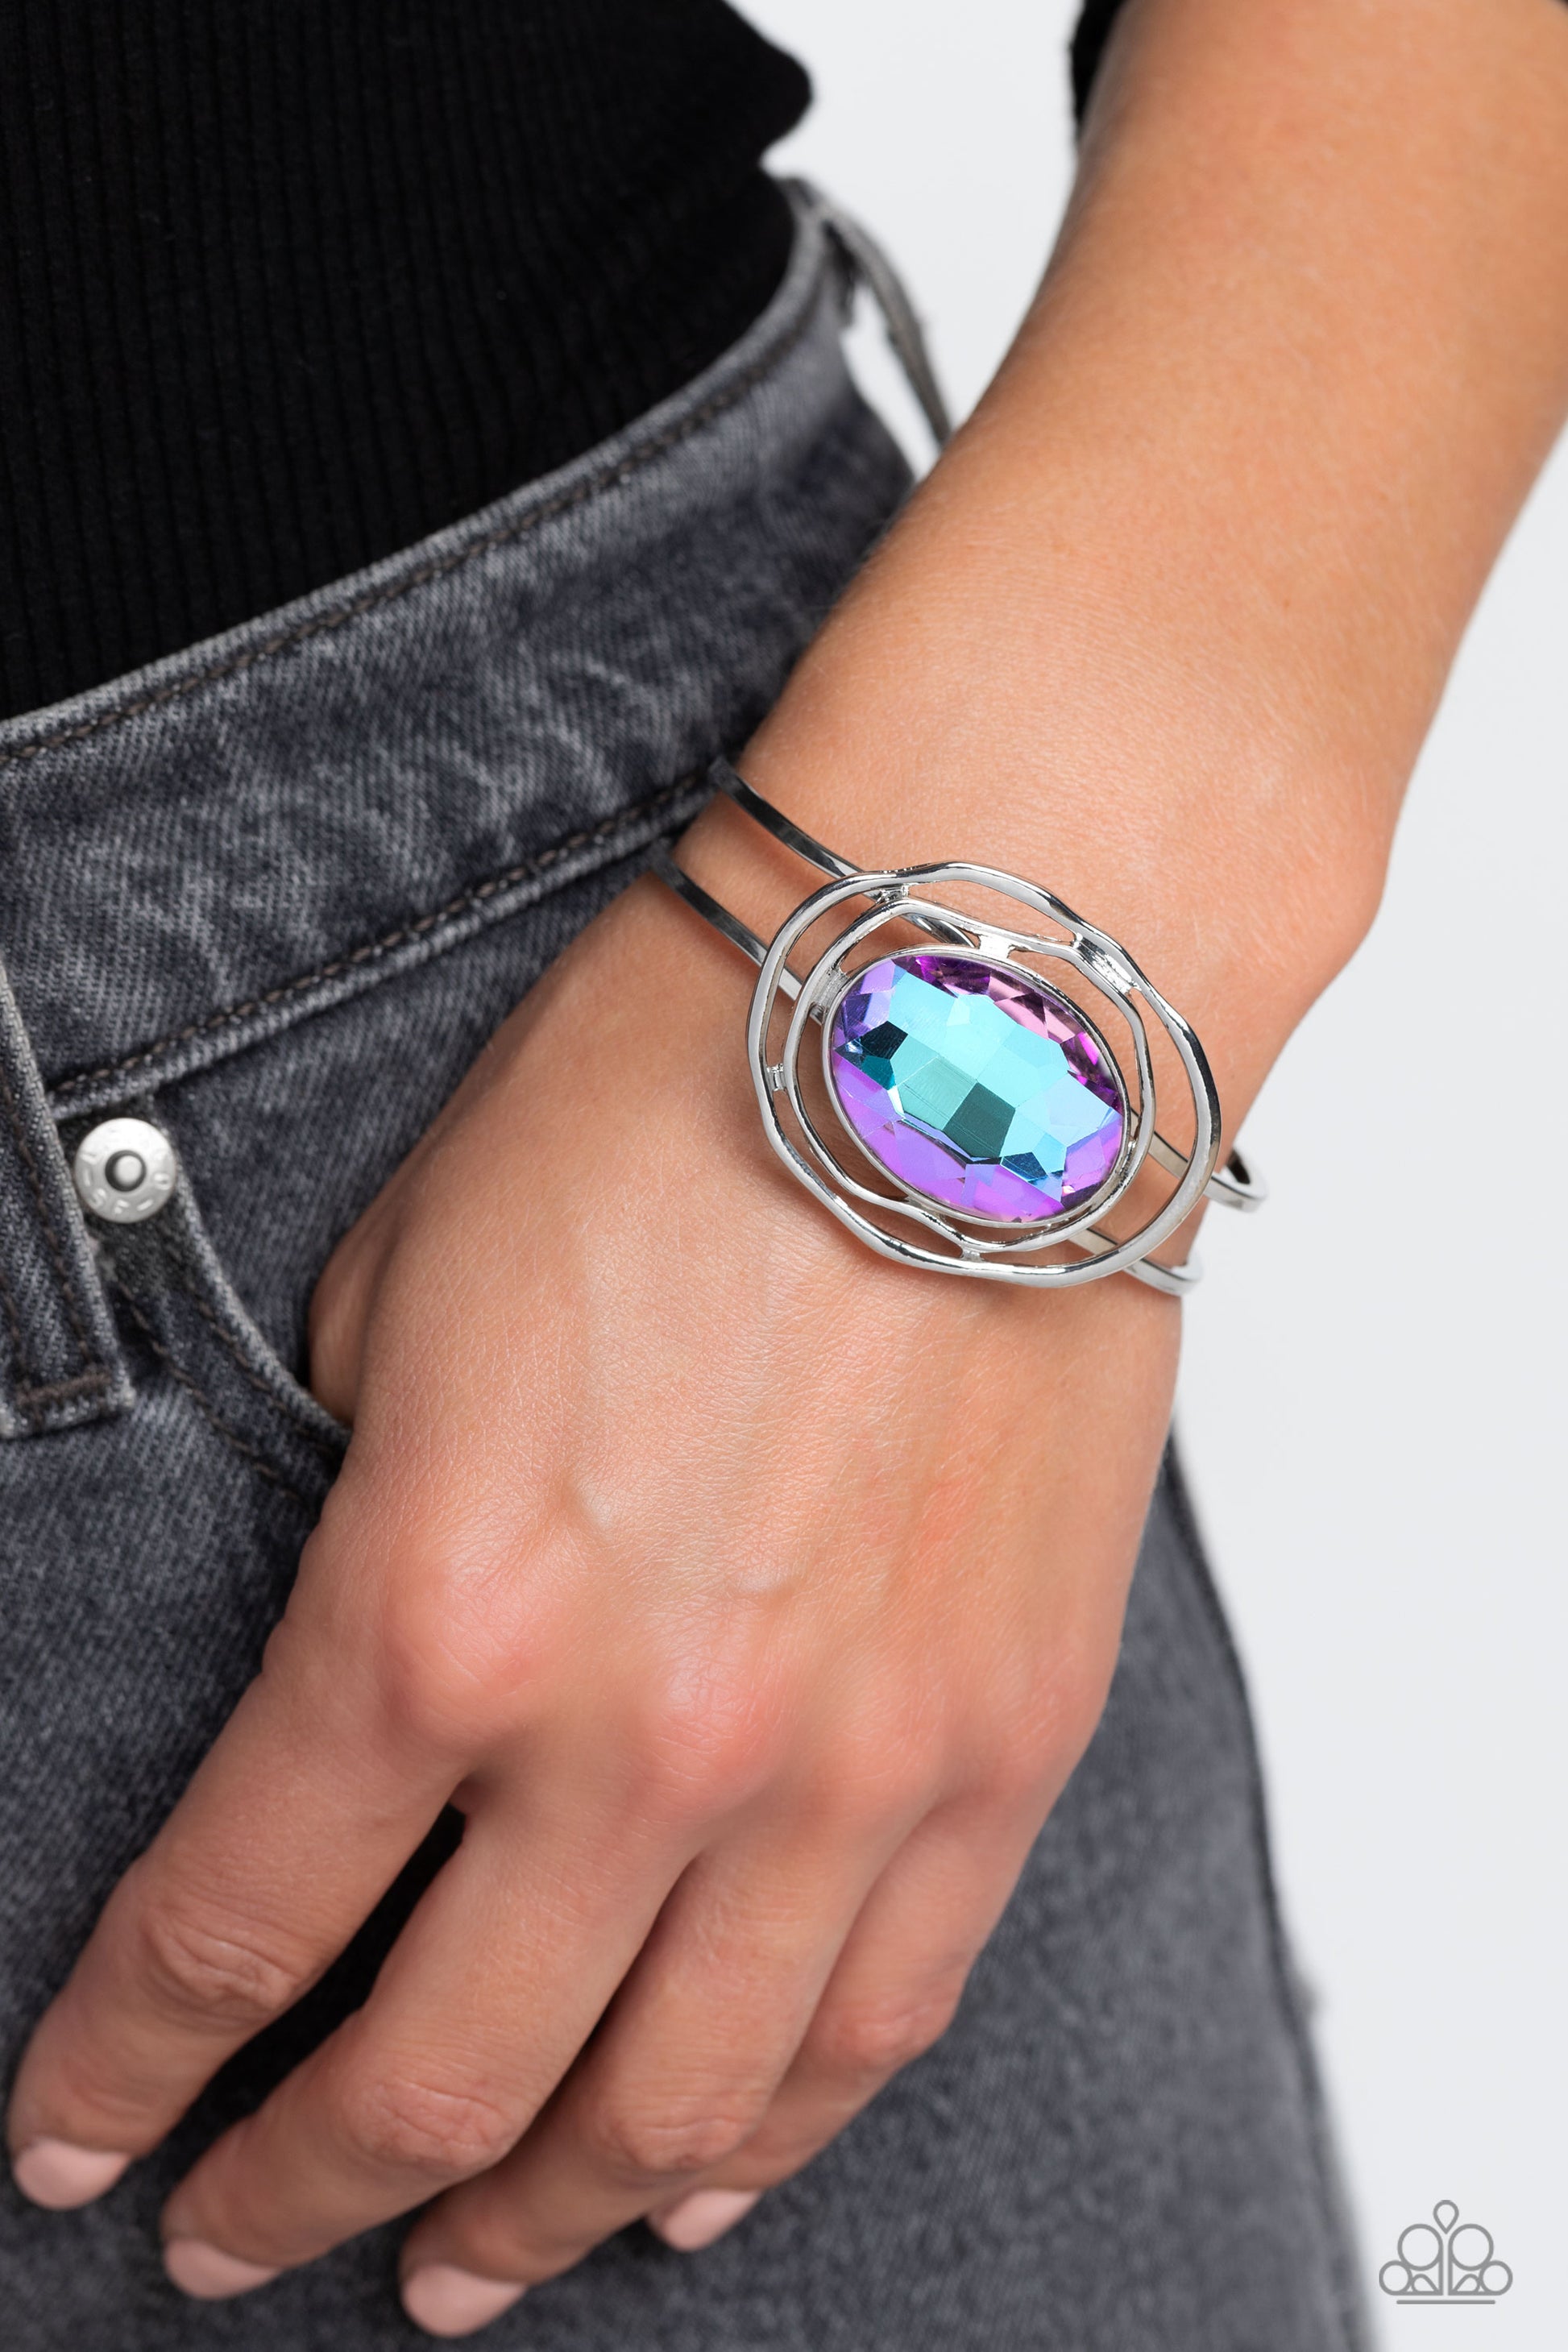 Paparazzi Accessories Substantial Sorceress - Purple Featured in the center of airy, shiny silver bands, an oversized, faceted purple oval gem rests atop the wrist for a dazzling pop of color. Warped, shiny silver rings seemingly float around the sparkly